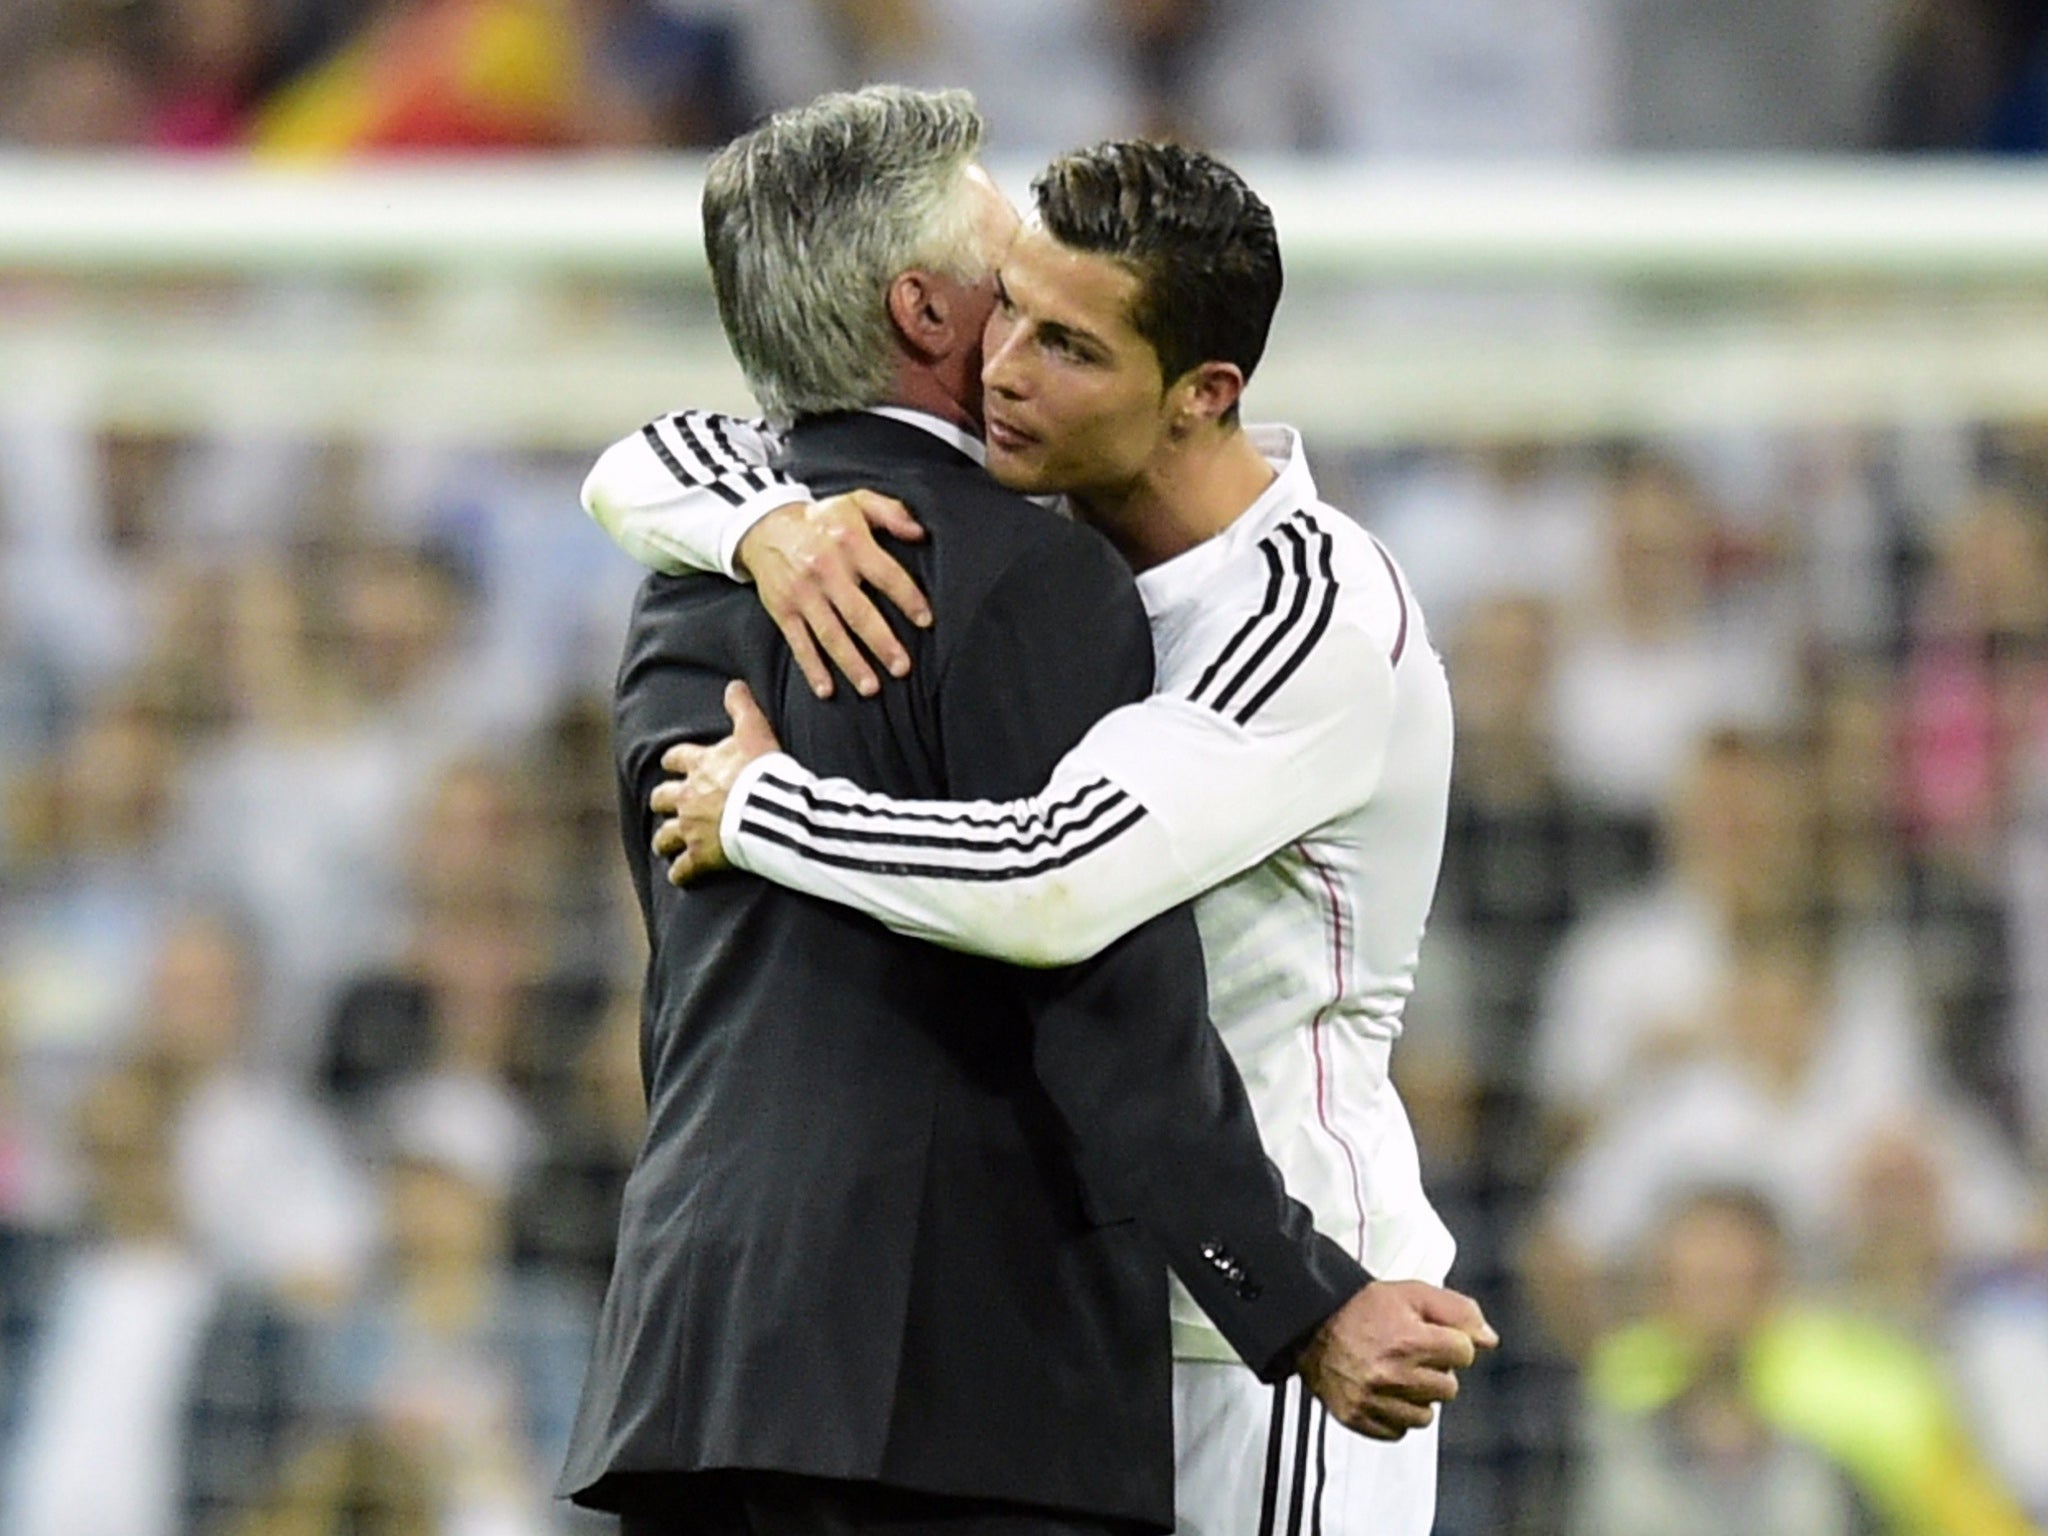 Cristiano Ronaldo embraces Carlo Ancelotti after Real Madrid's win over Barcelona back in October 2014